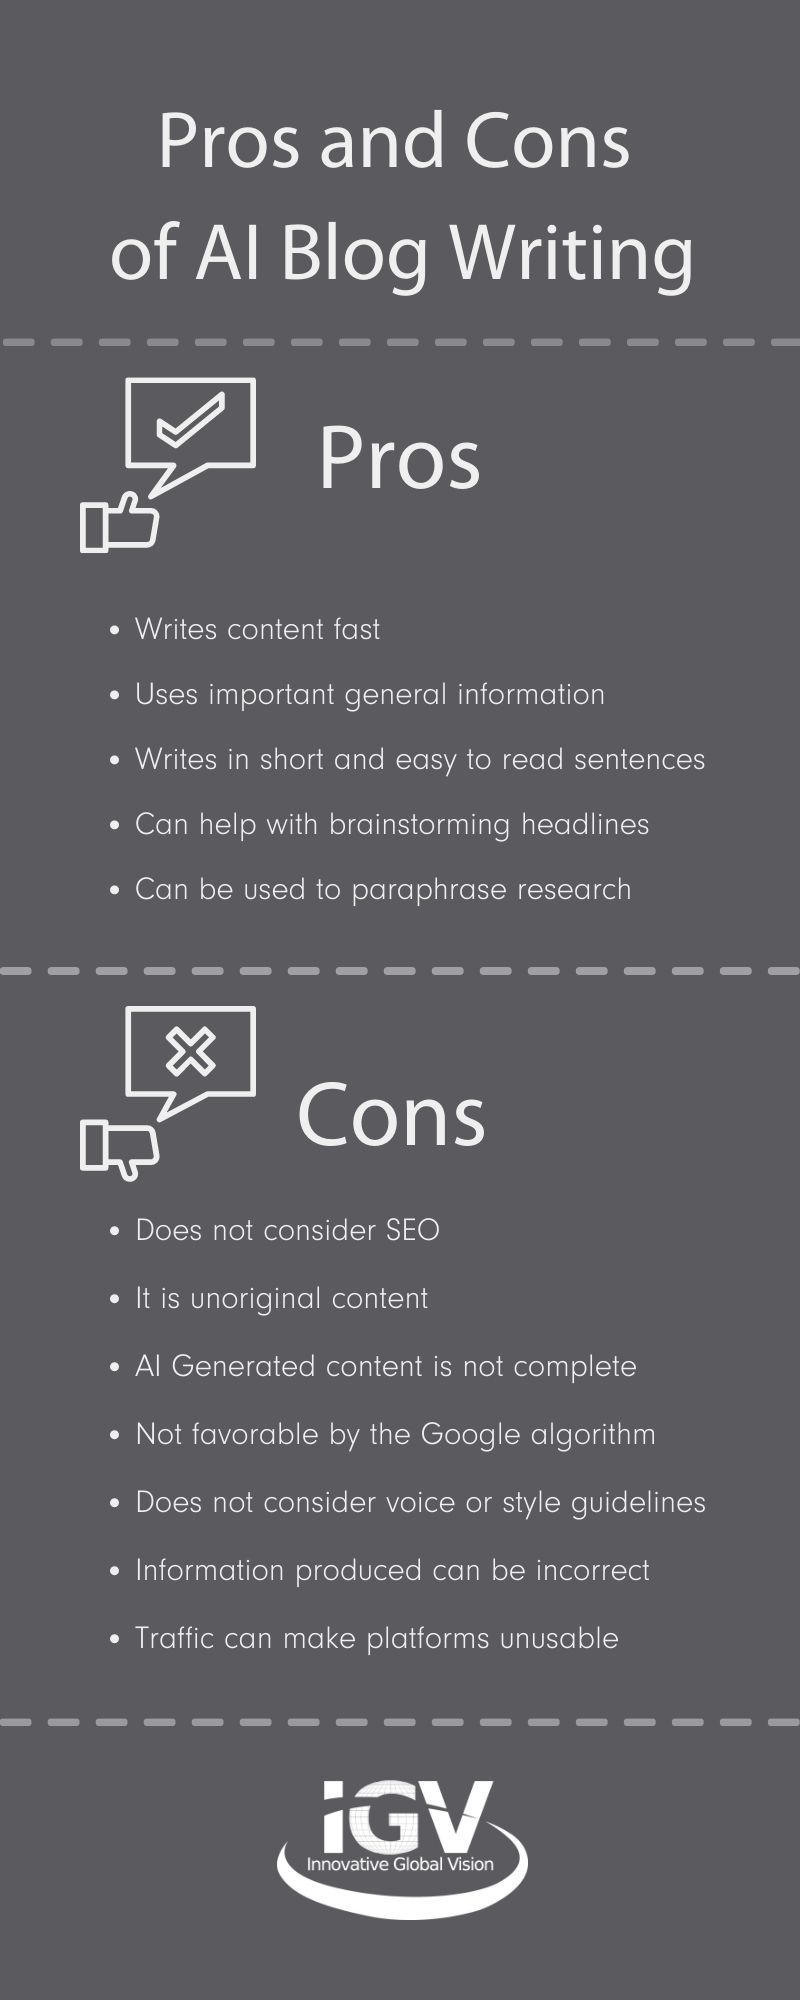  infographic of the Pros and Cons of AI Blog Writing, list shown is the same as in the blog article. 